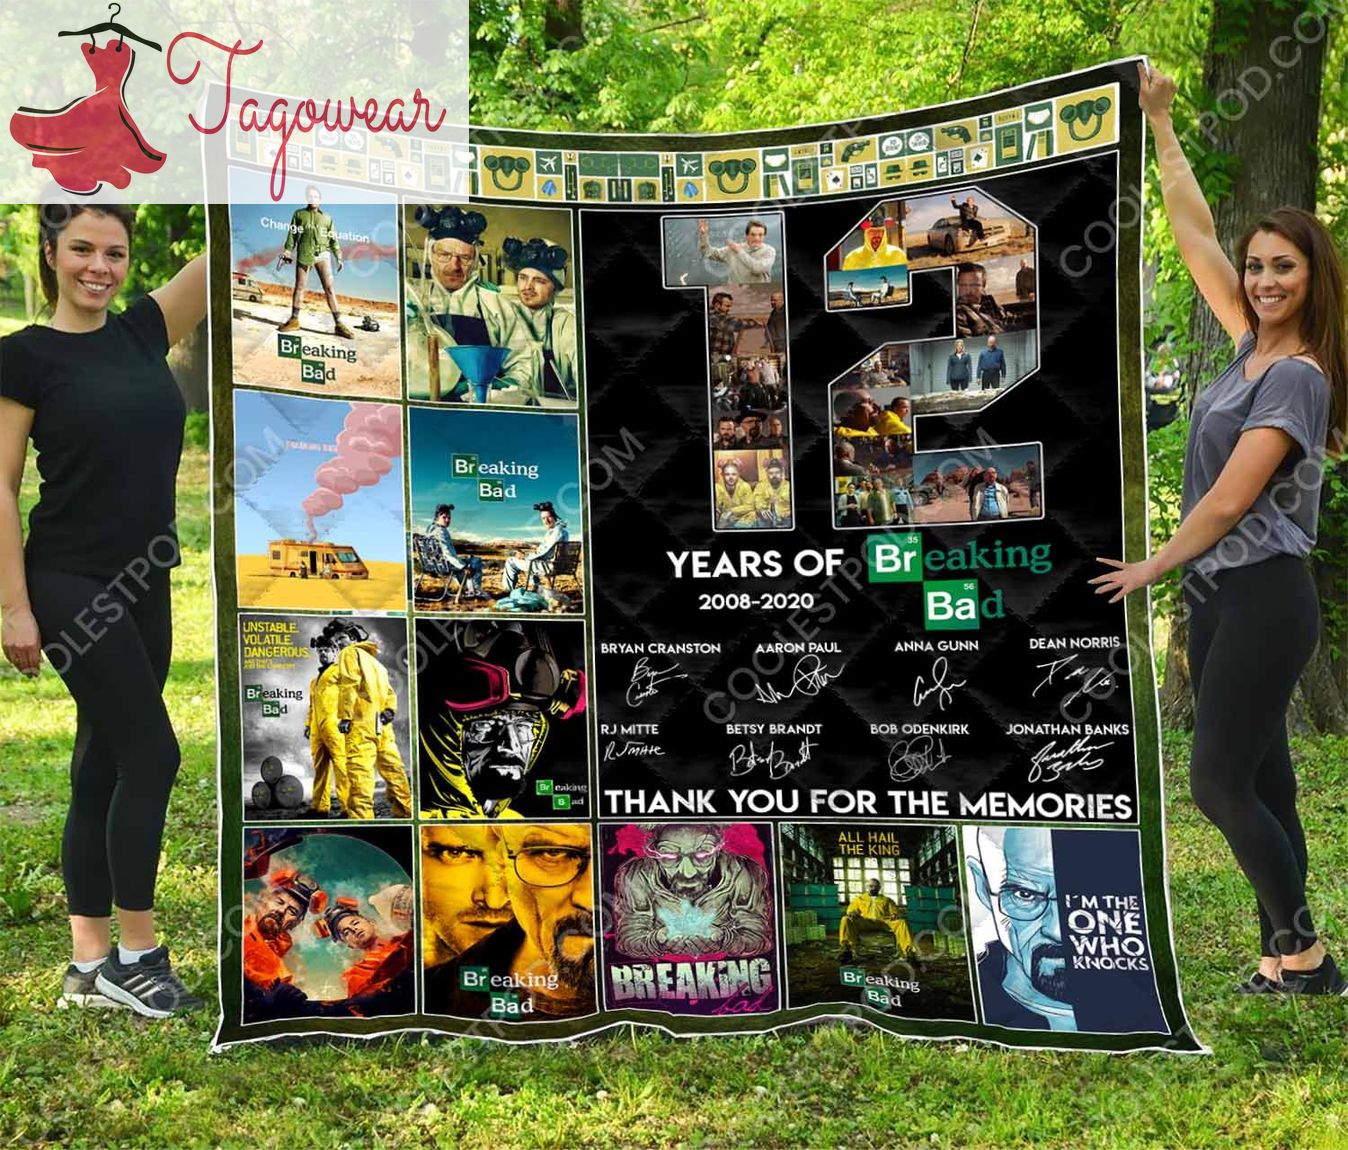 12 Of Years Breaking Bad 2008-2020 Thank You For The Memories Signatures Quilt Blanket